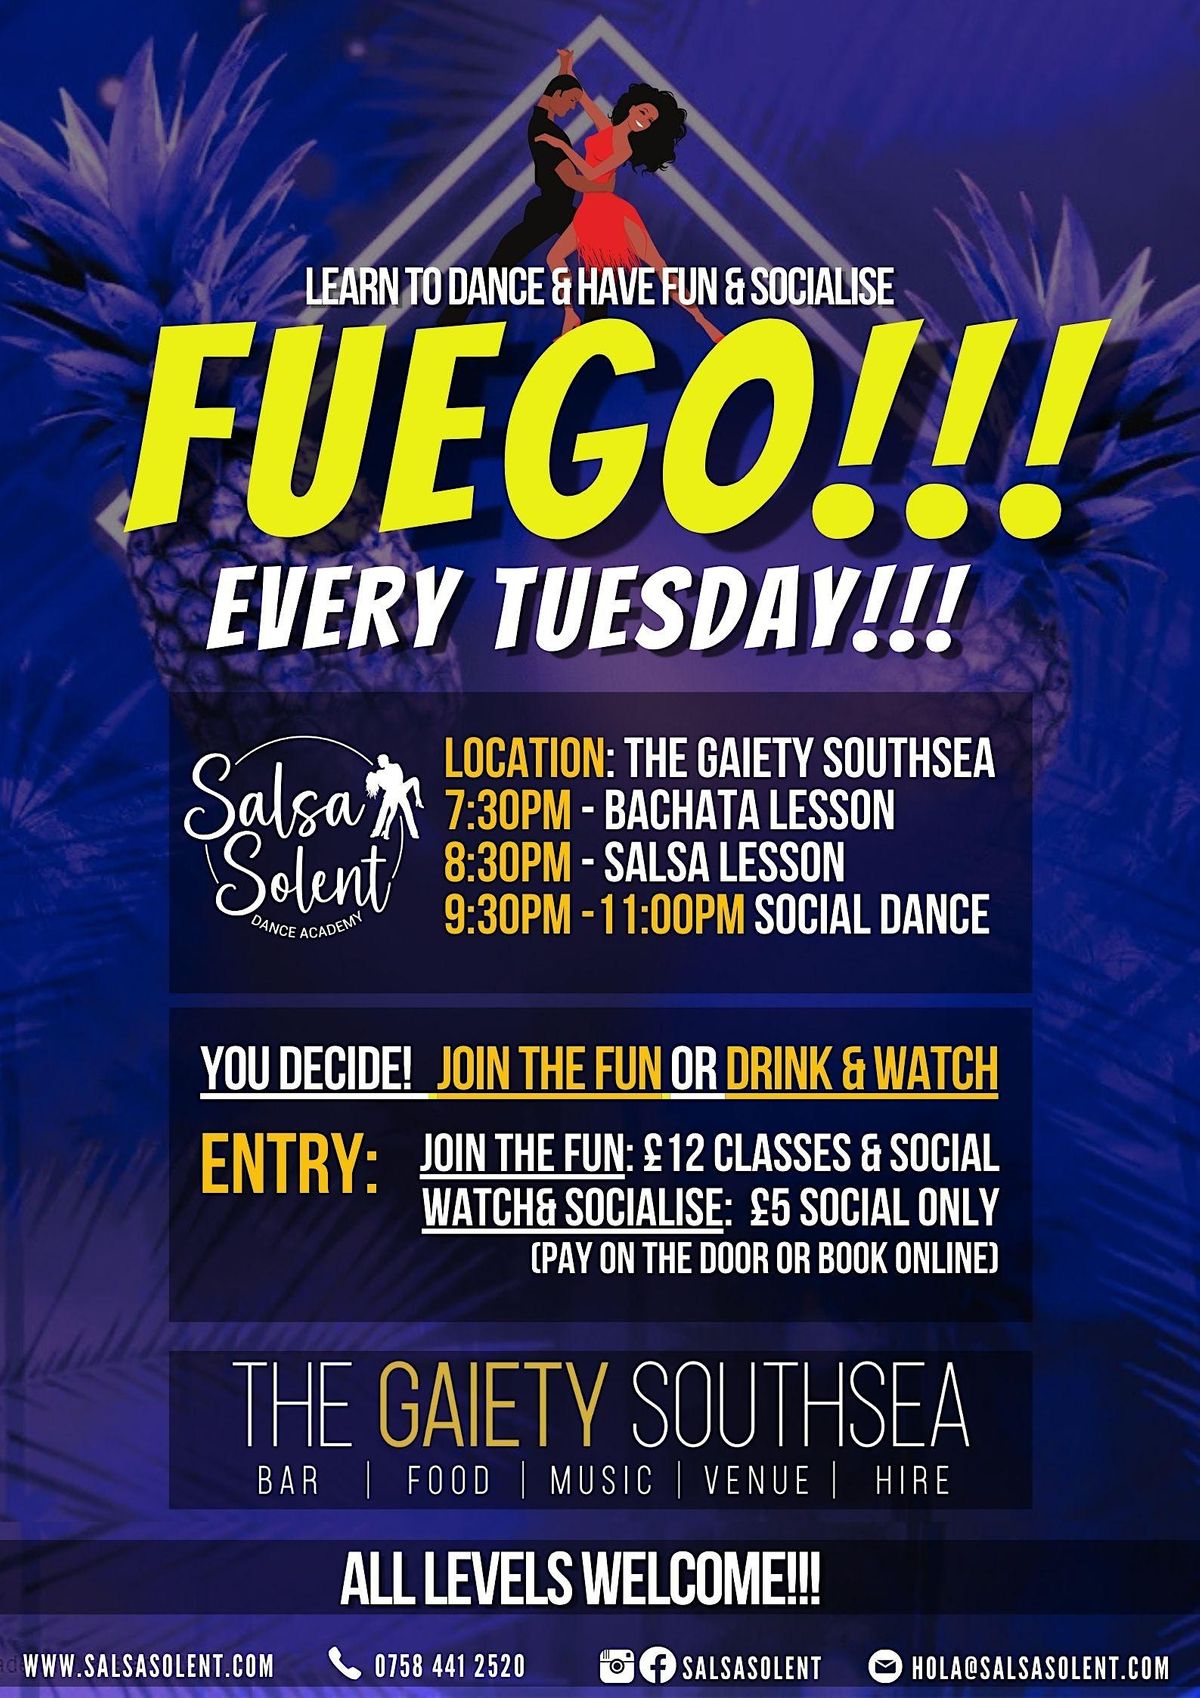 Latin Dance Classes - TUESDAYS at The Gaiety Southsea